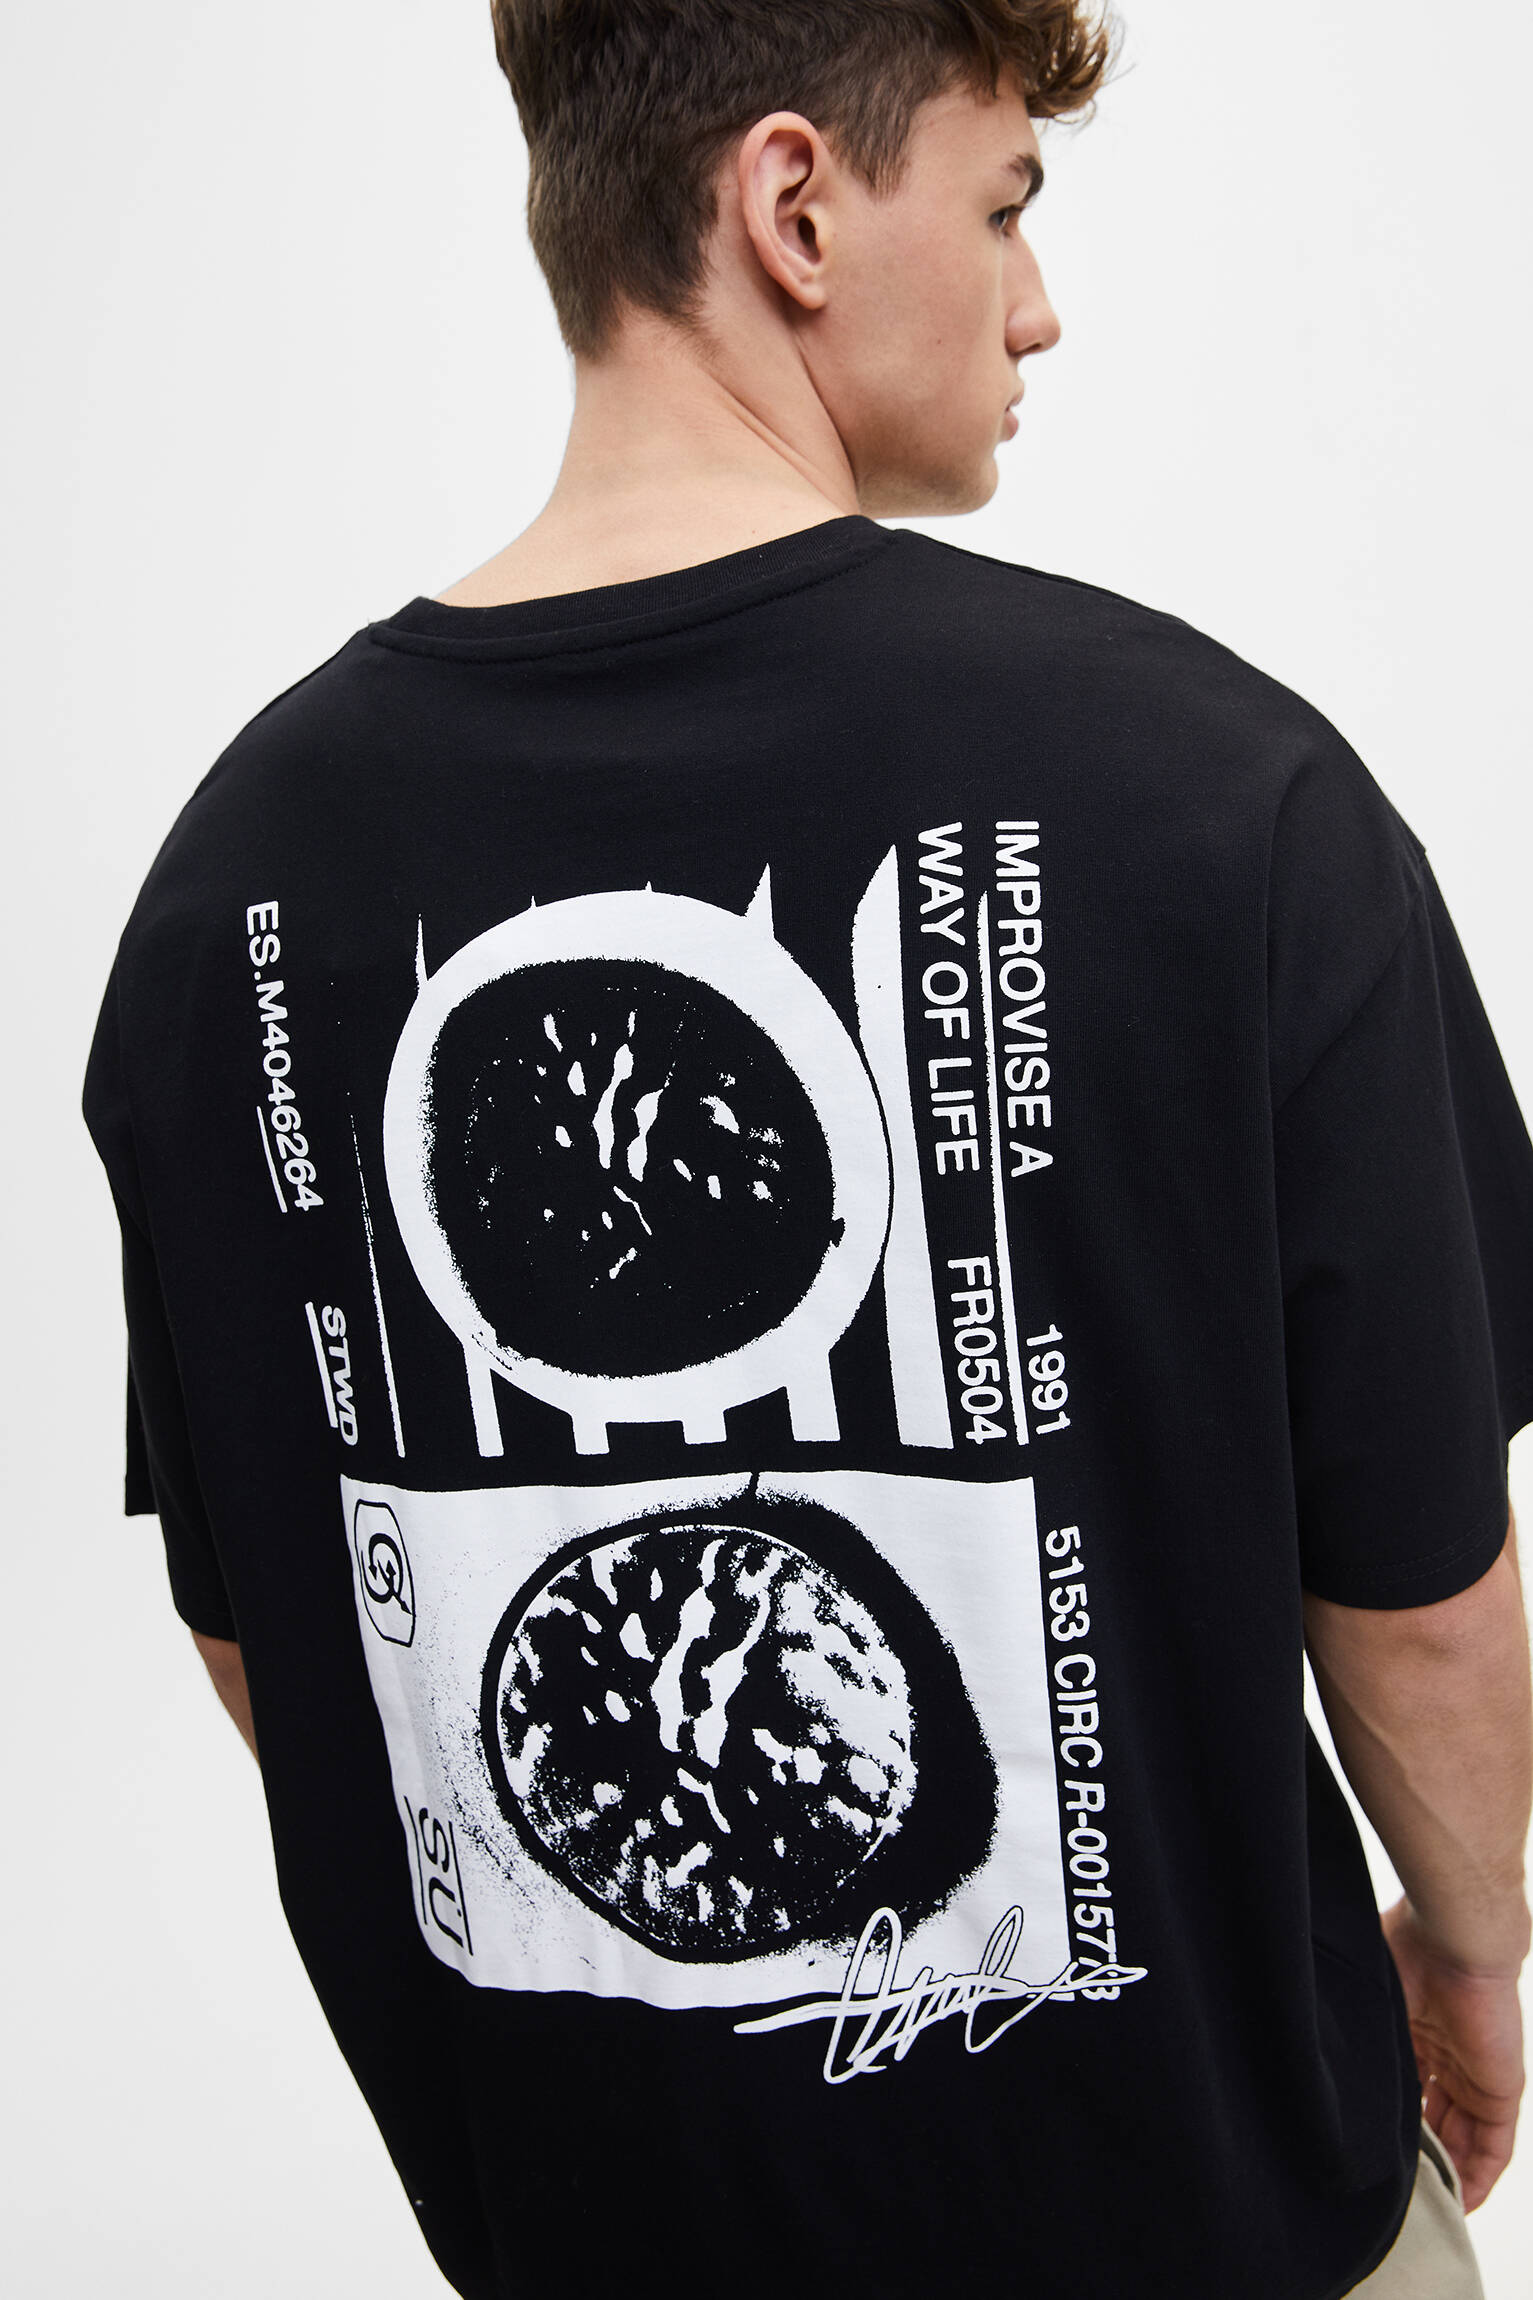 Pull & Bear - Black T-shirt with STWD illustration